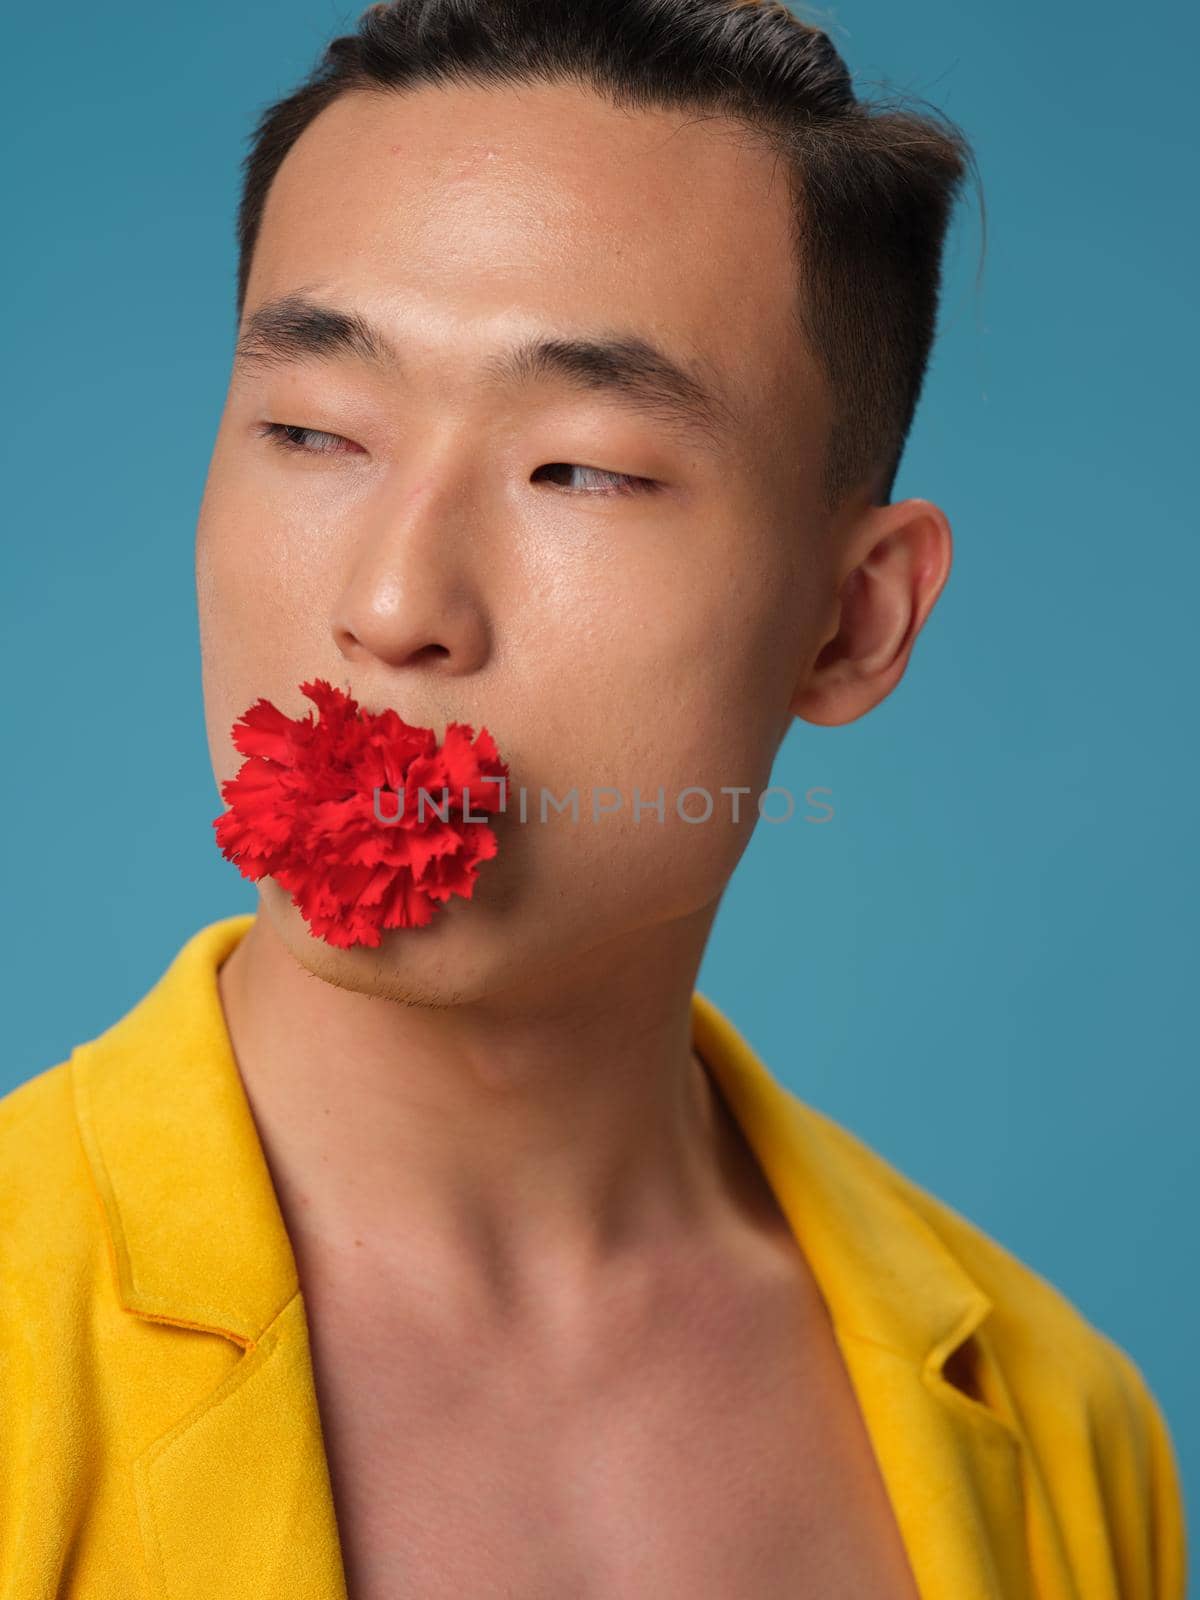 Portrait of a Korean man with a red flower in his mouth by SHOTPRIME